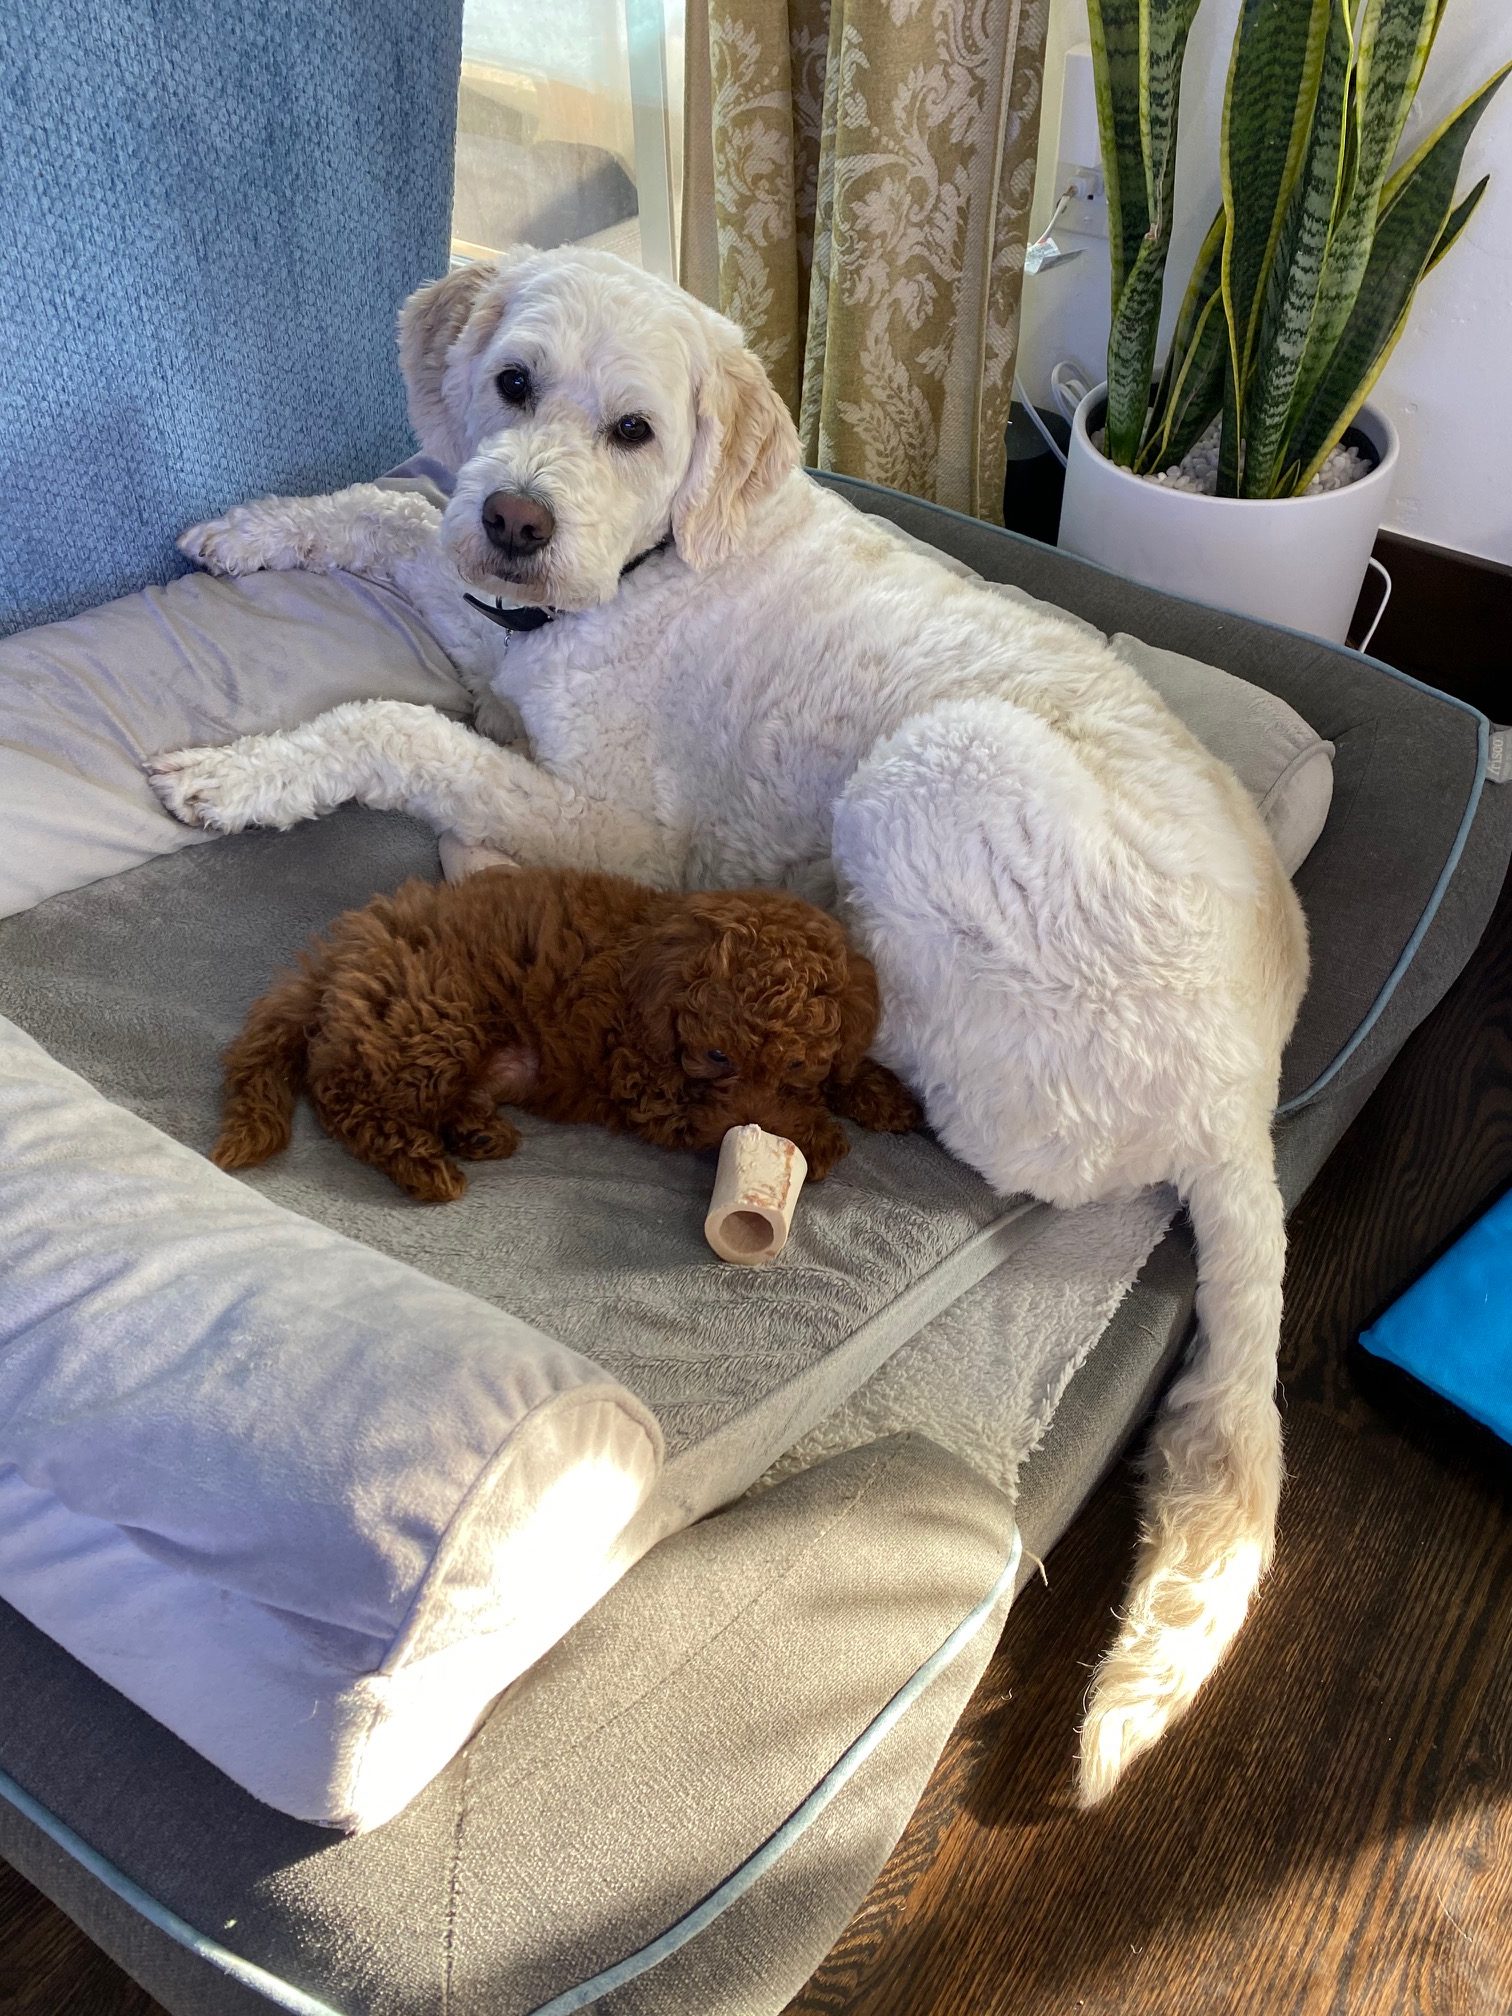 A mature dog peacefully resting on a comfortable bed alongside a young and adorable puppy.